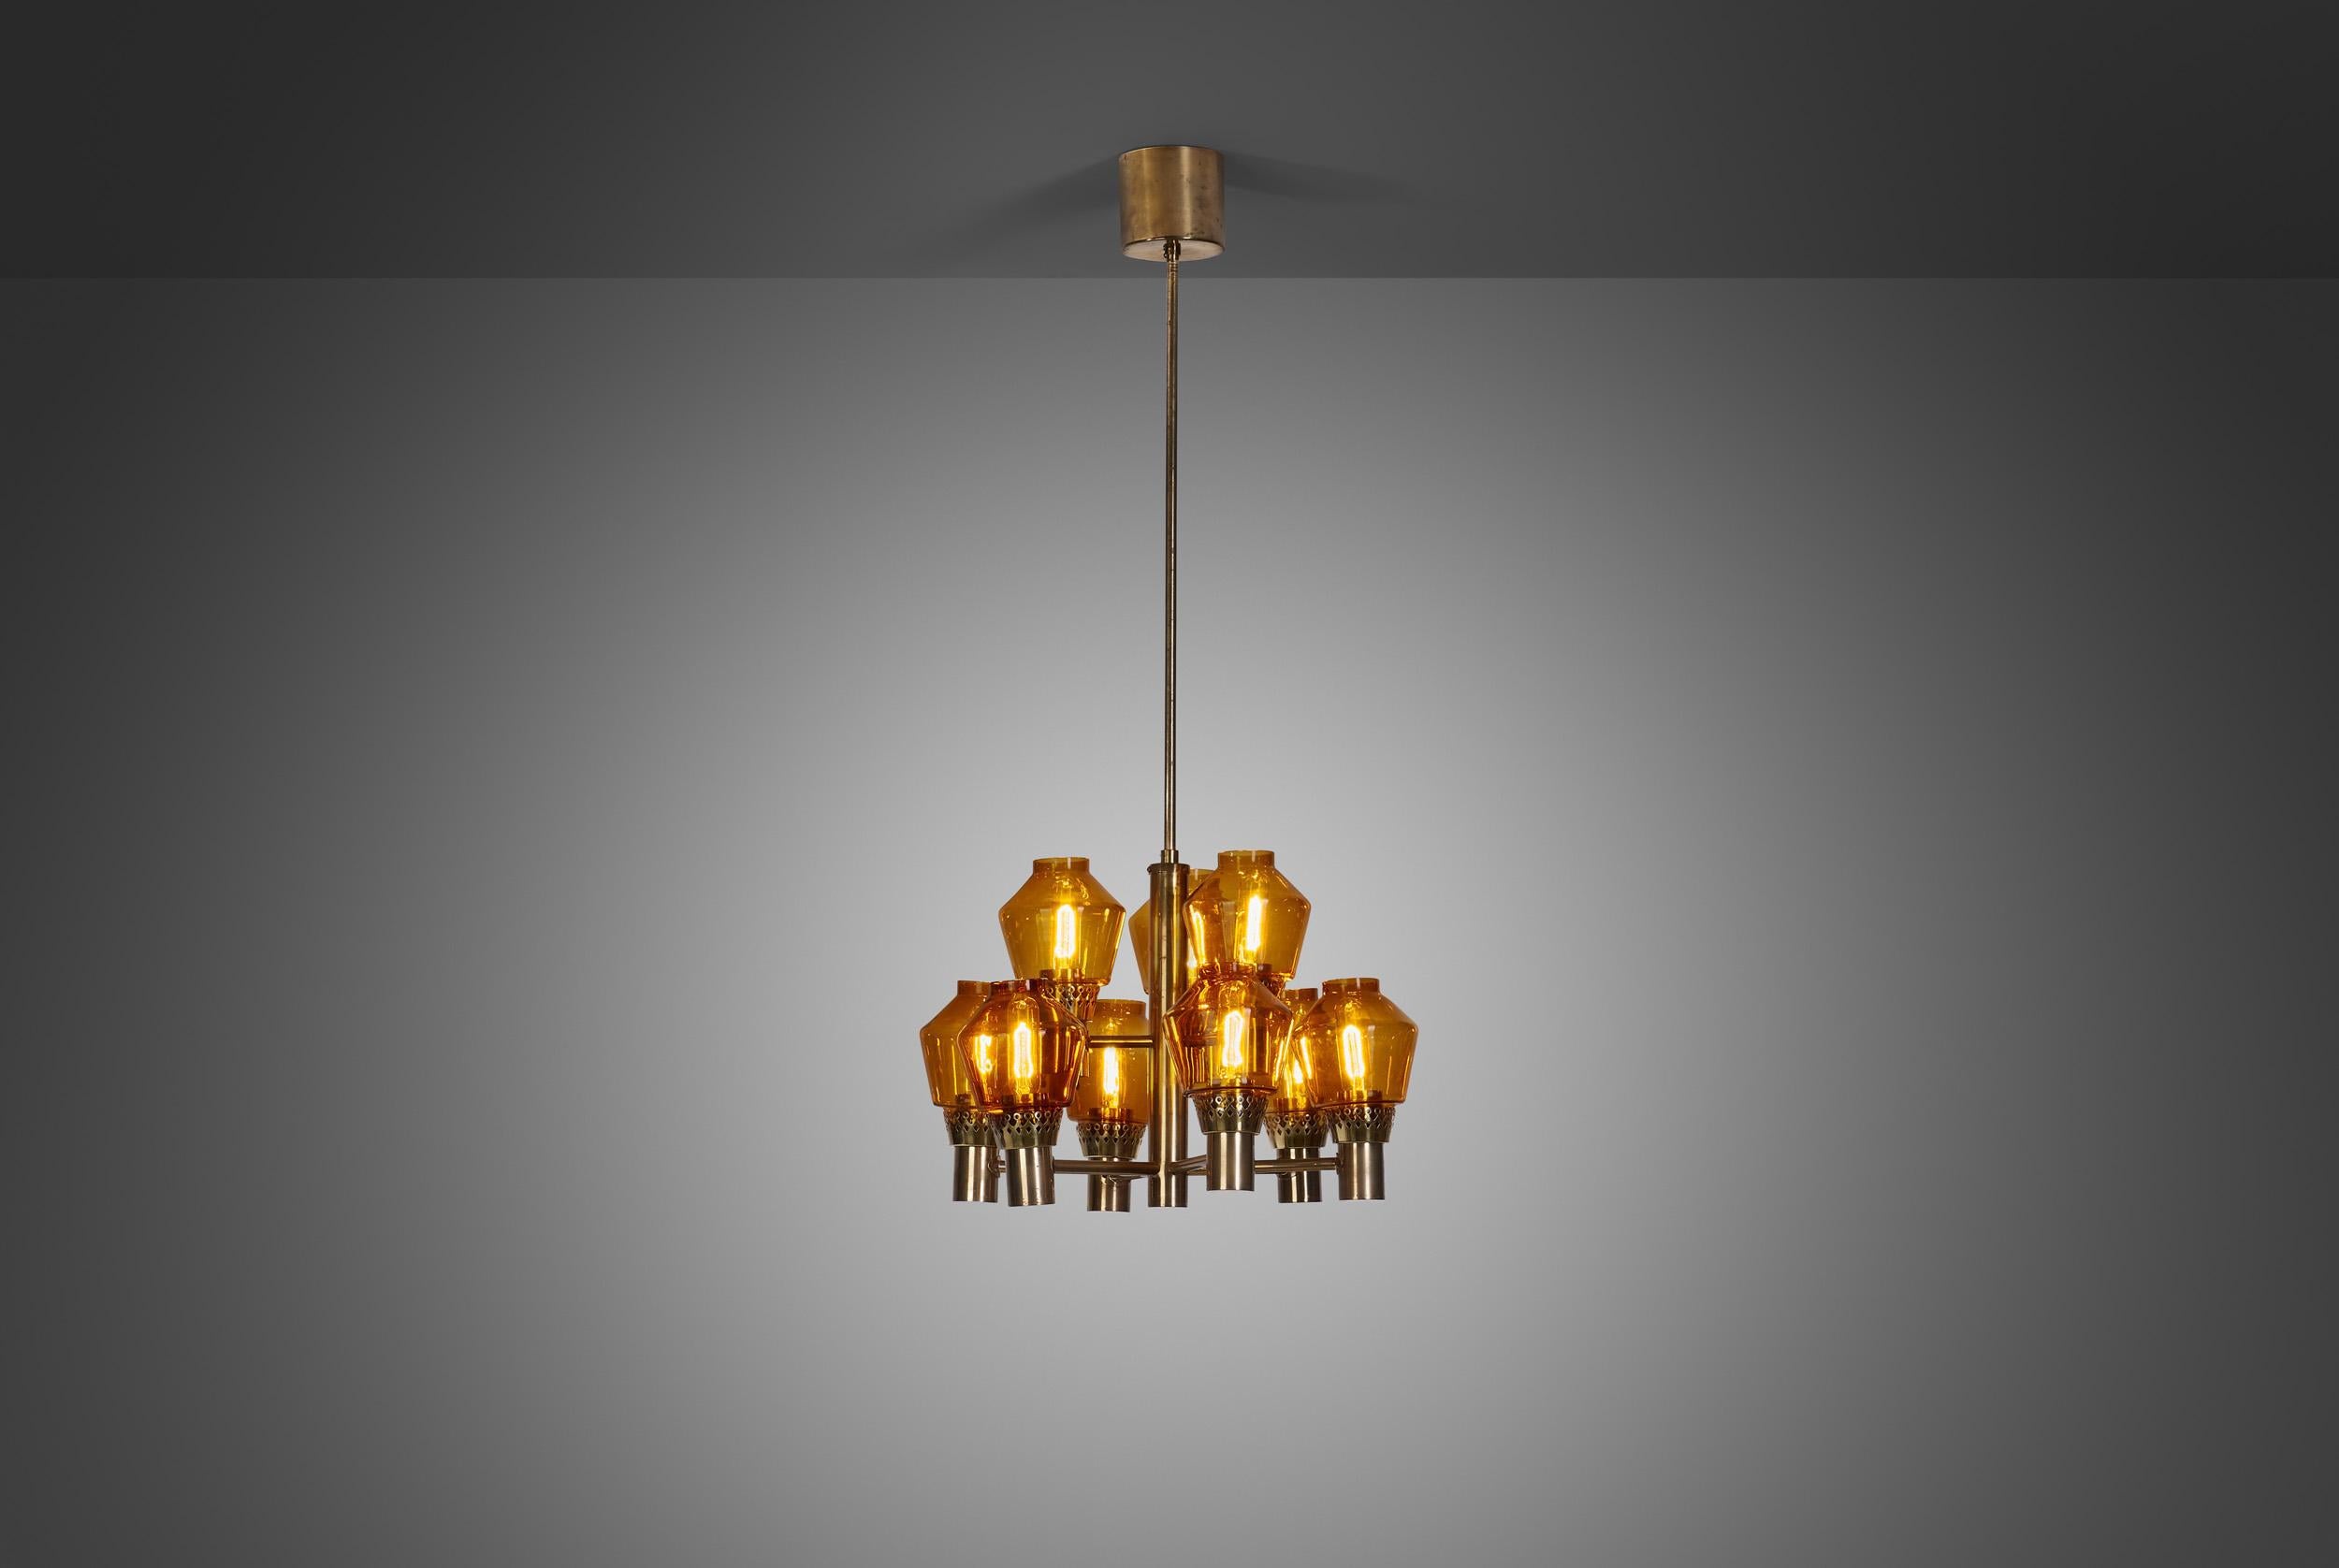 This equally rare and marvellous, brass nine-light chandelier was created in what we now call “the golden age of Scandinavian design”. Hans-Agne Jakobsson was the great Swedish master of lighting, designing some of the most recognizable mid-century